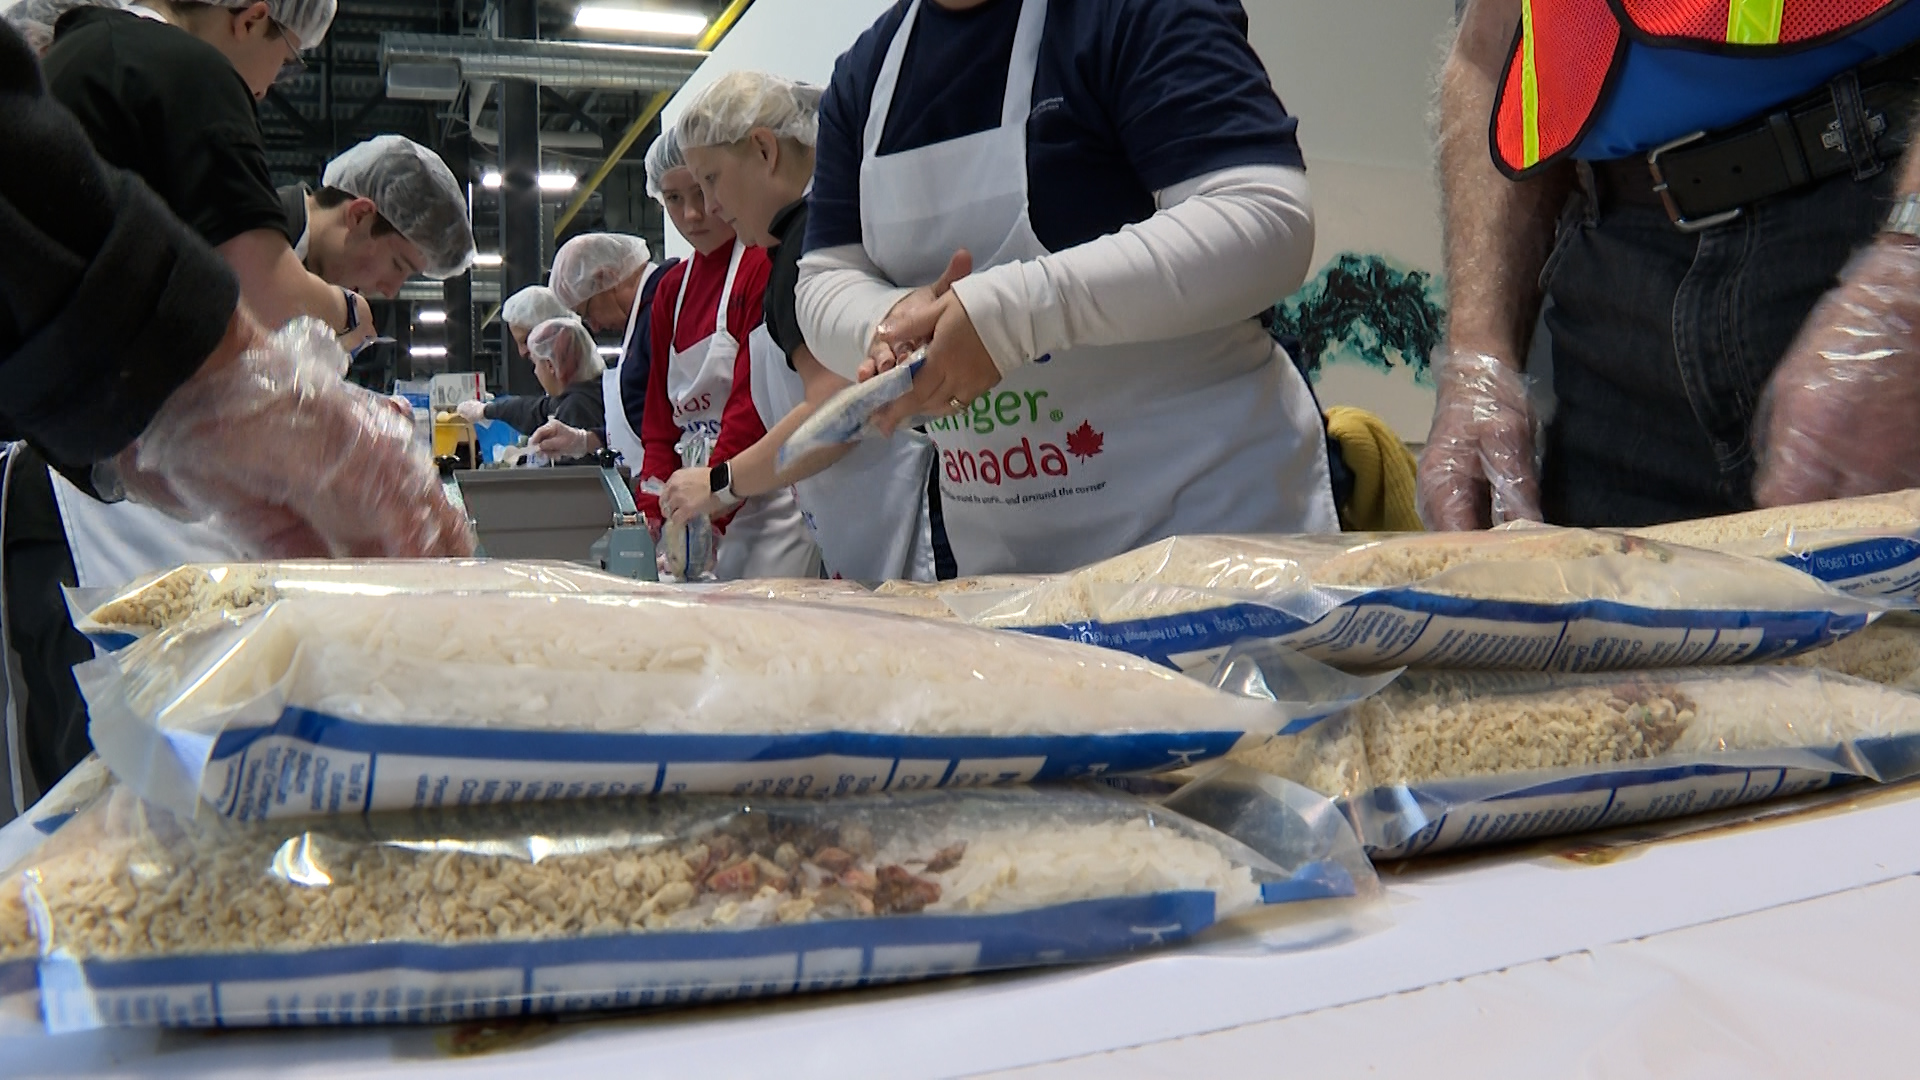 Kingston volunteers package 14,500 meals to fight food insecurity